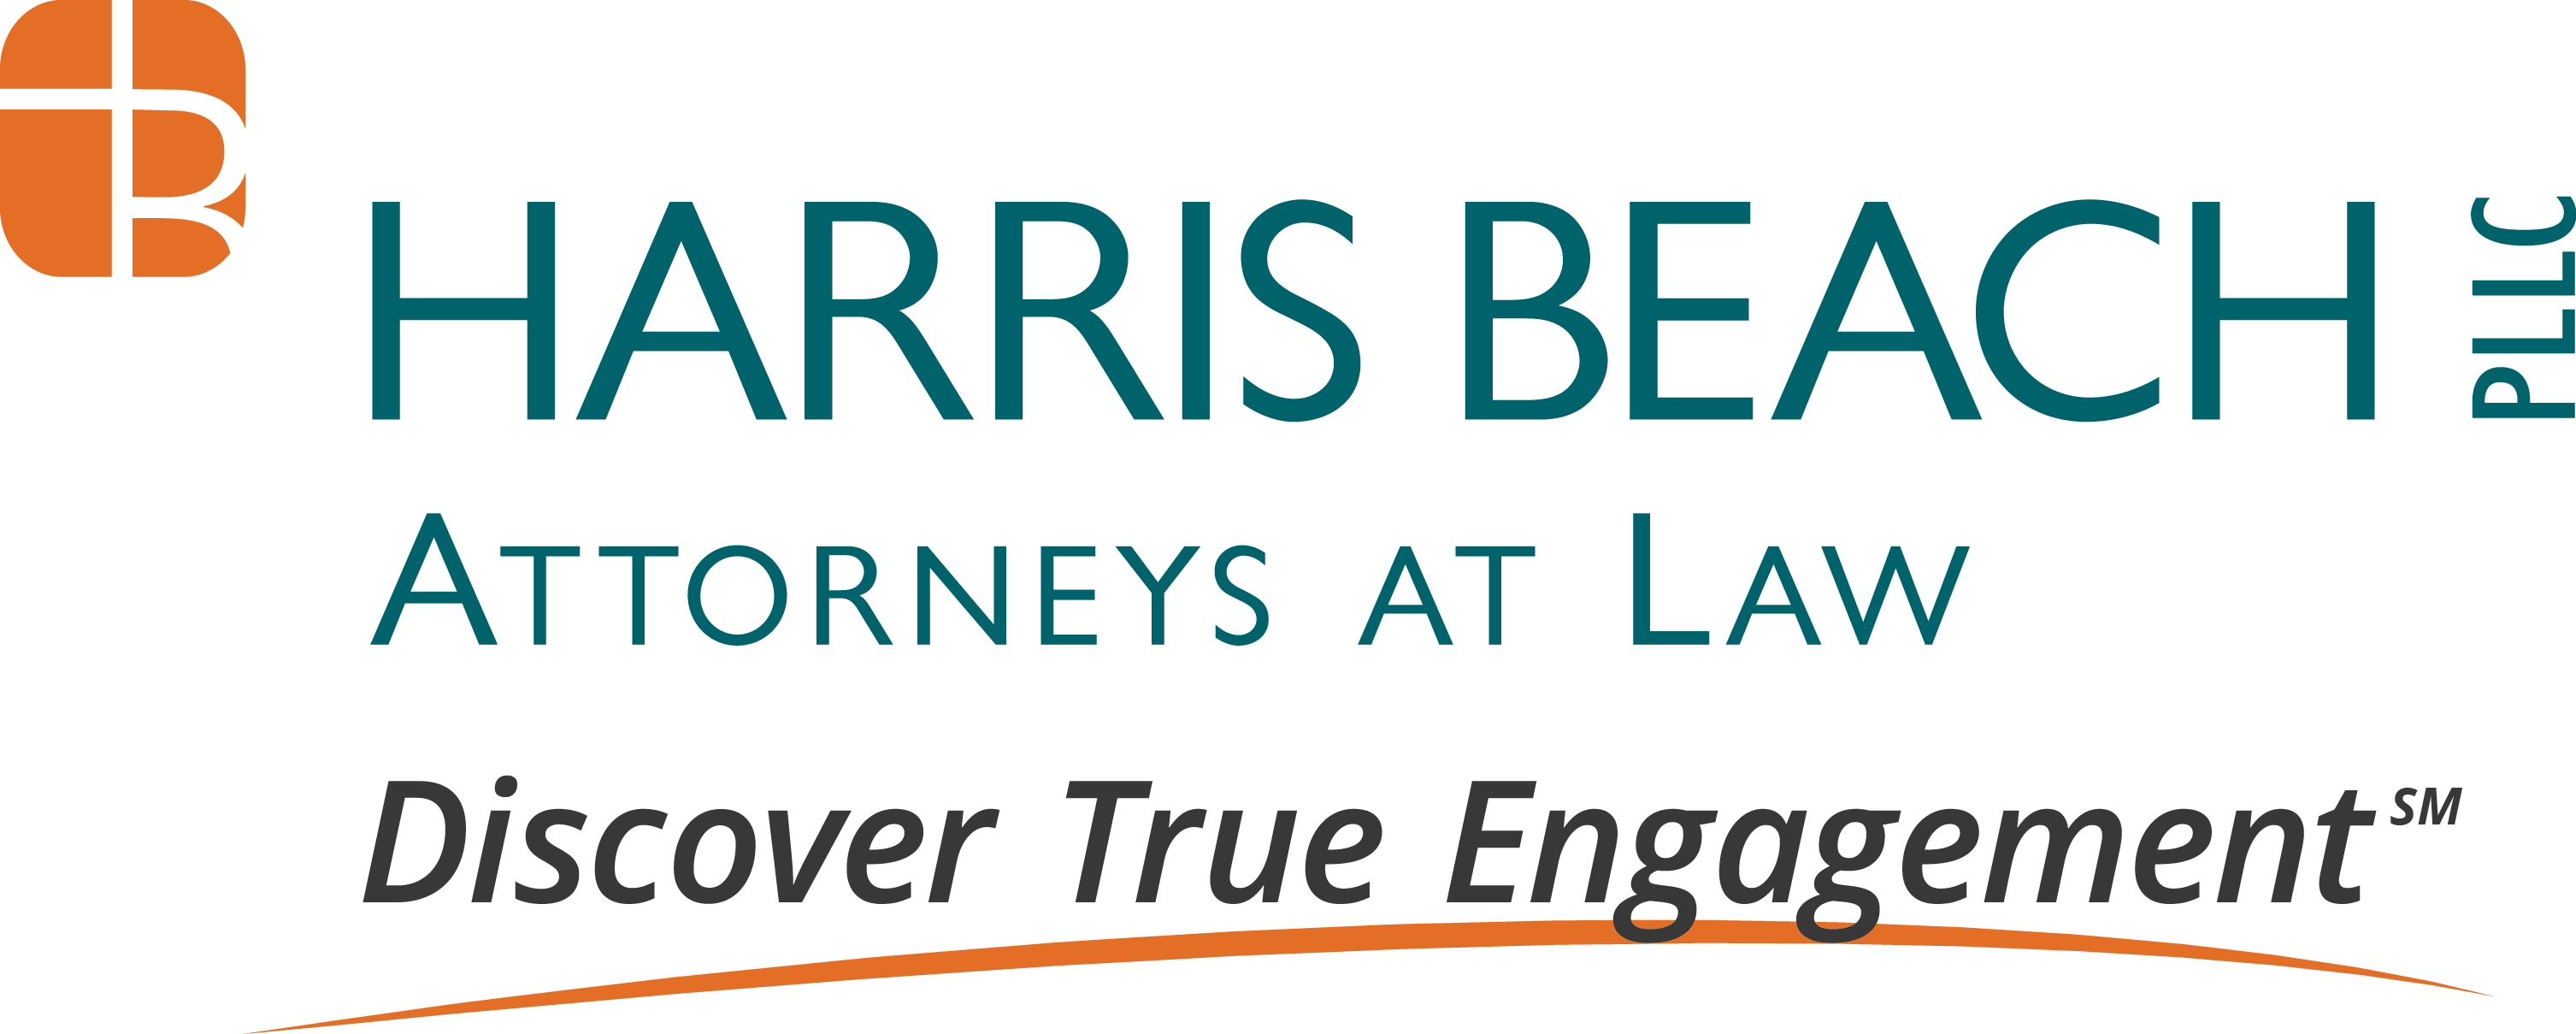 Harris Beach PLLC Attorneys at Law Discover True Engagement